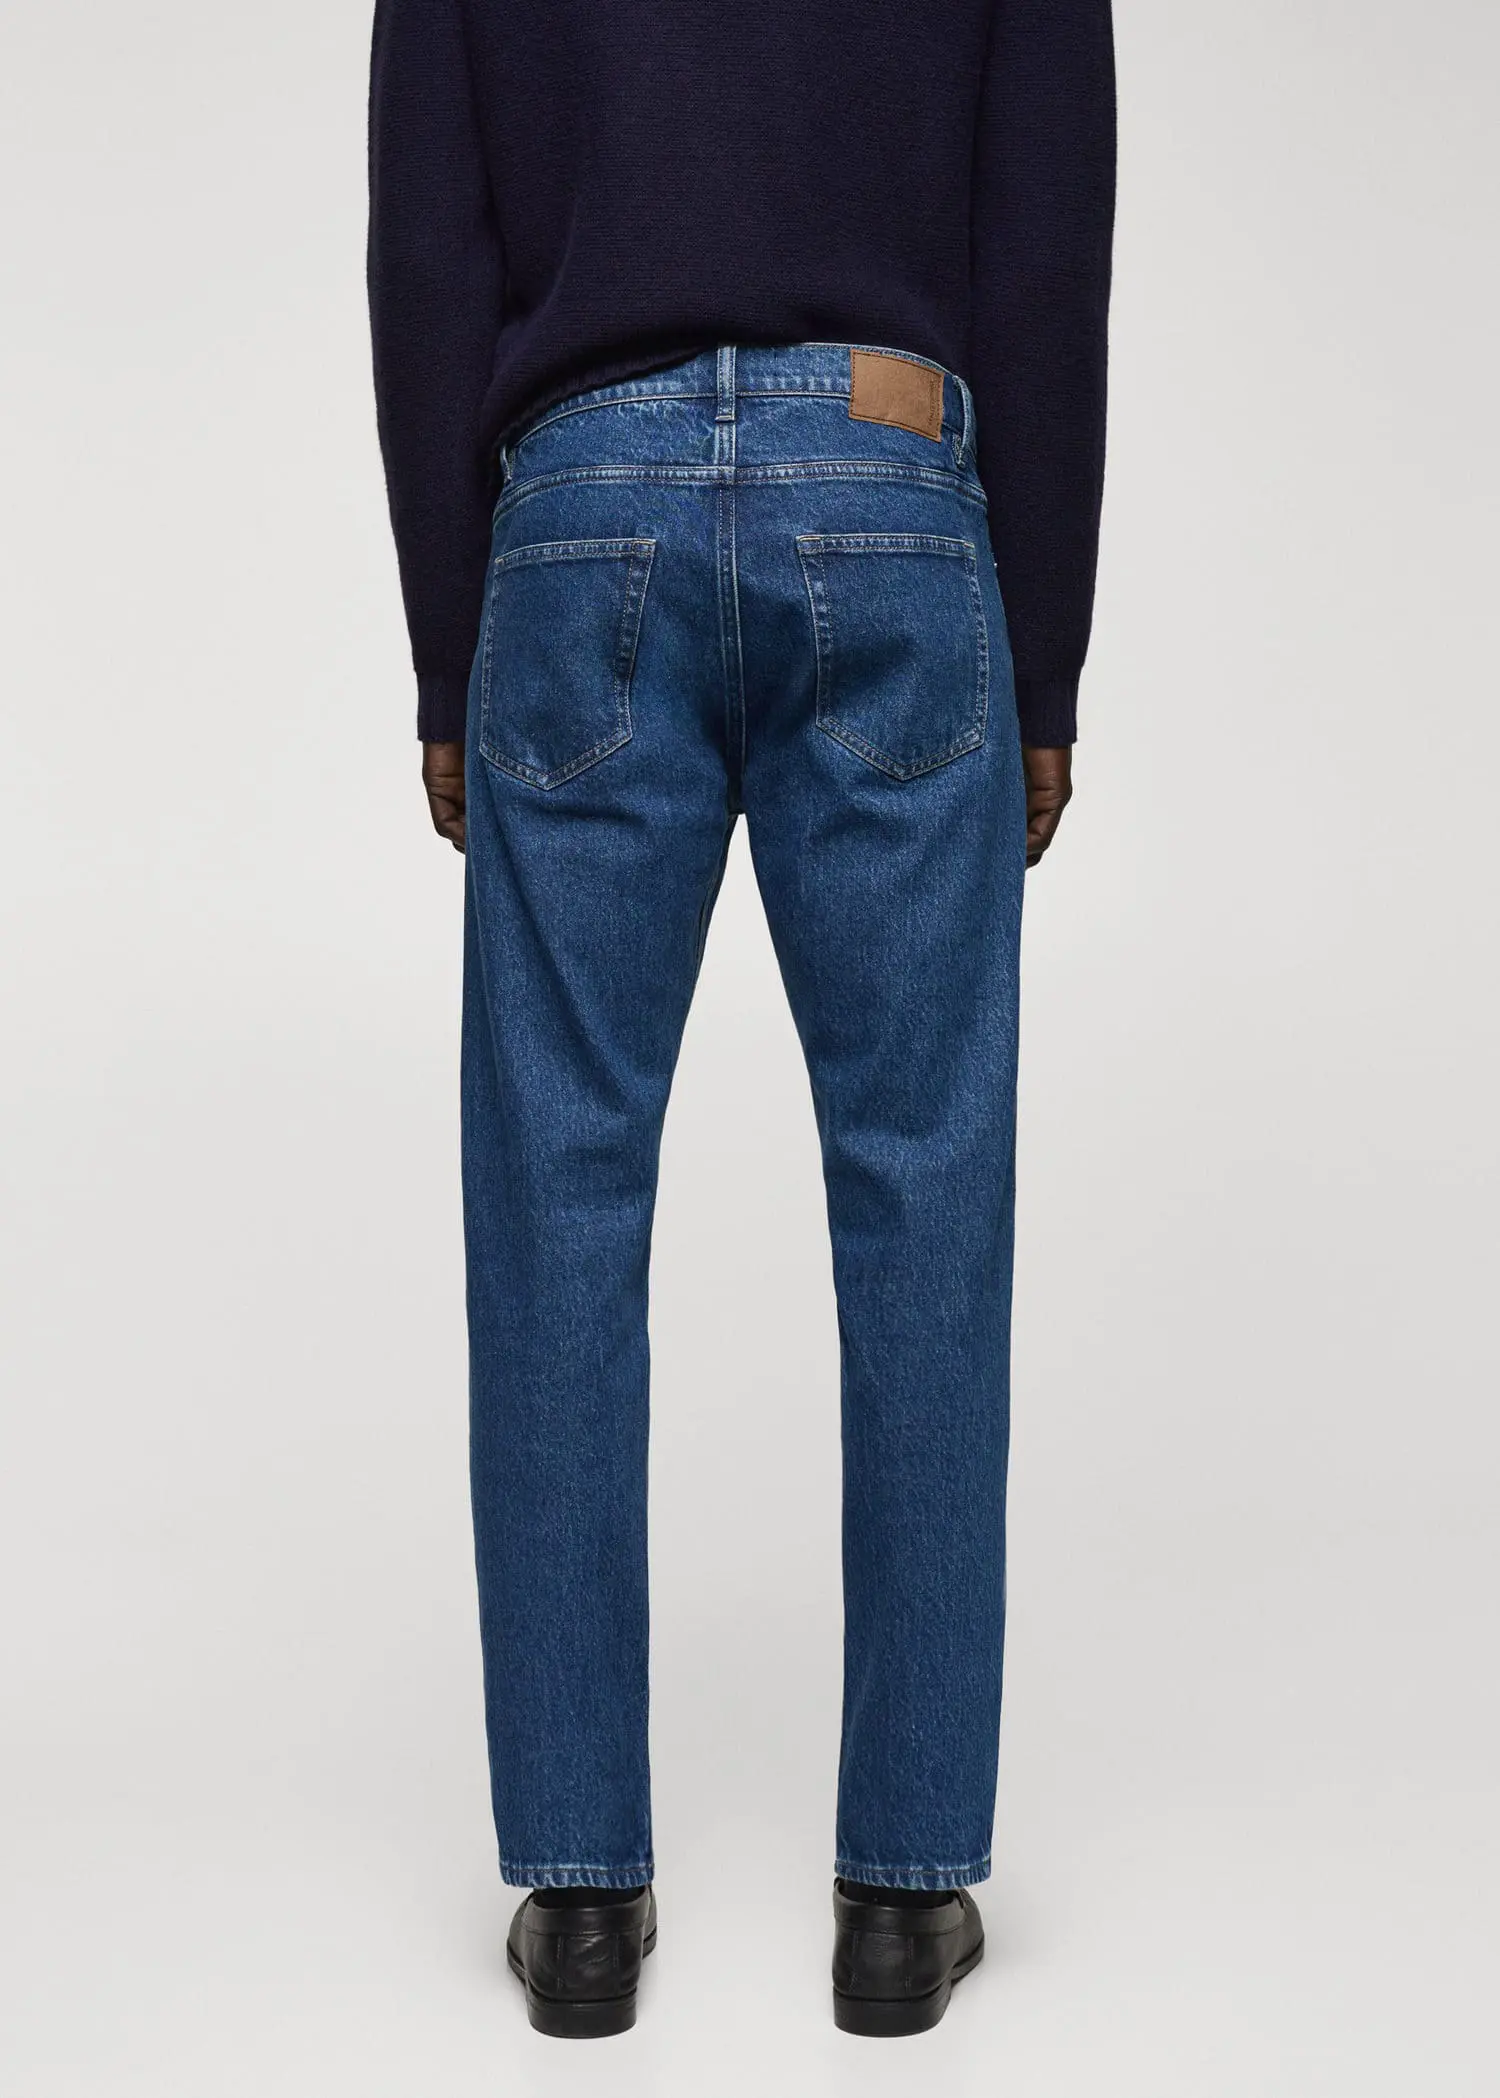 Mango Ben tapered fit jeans. 3